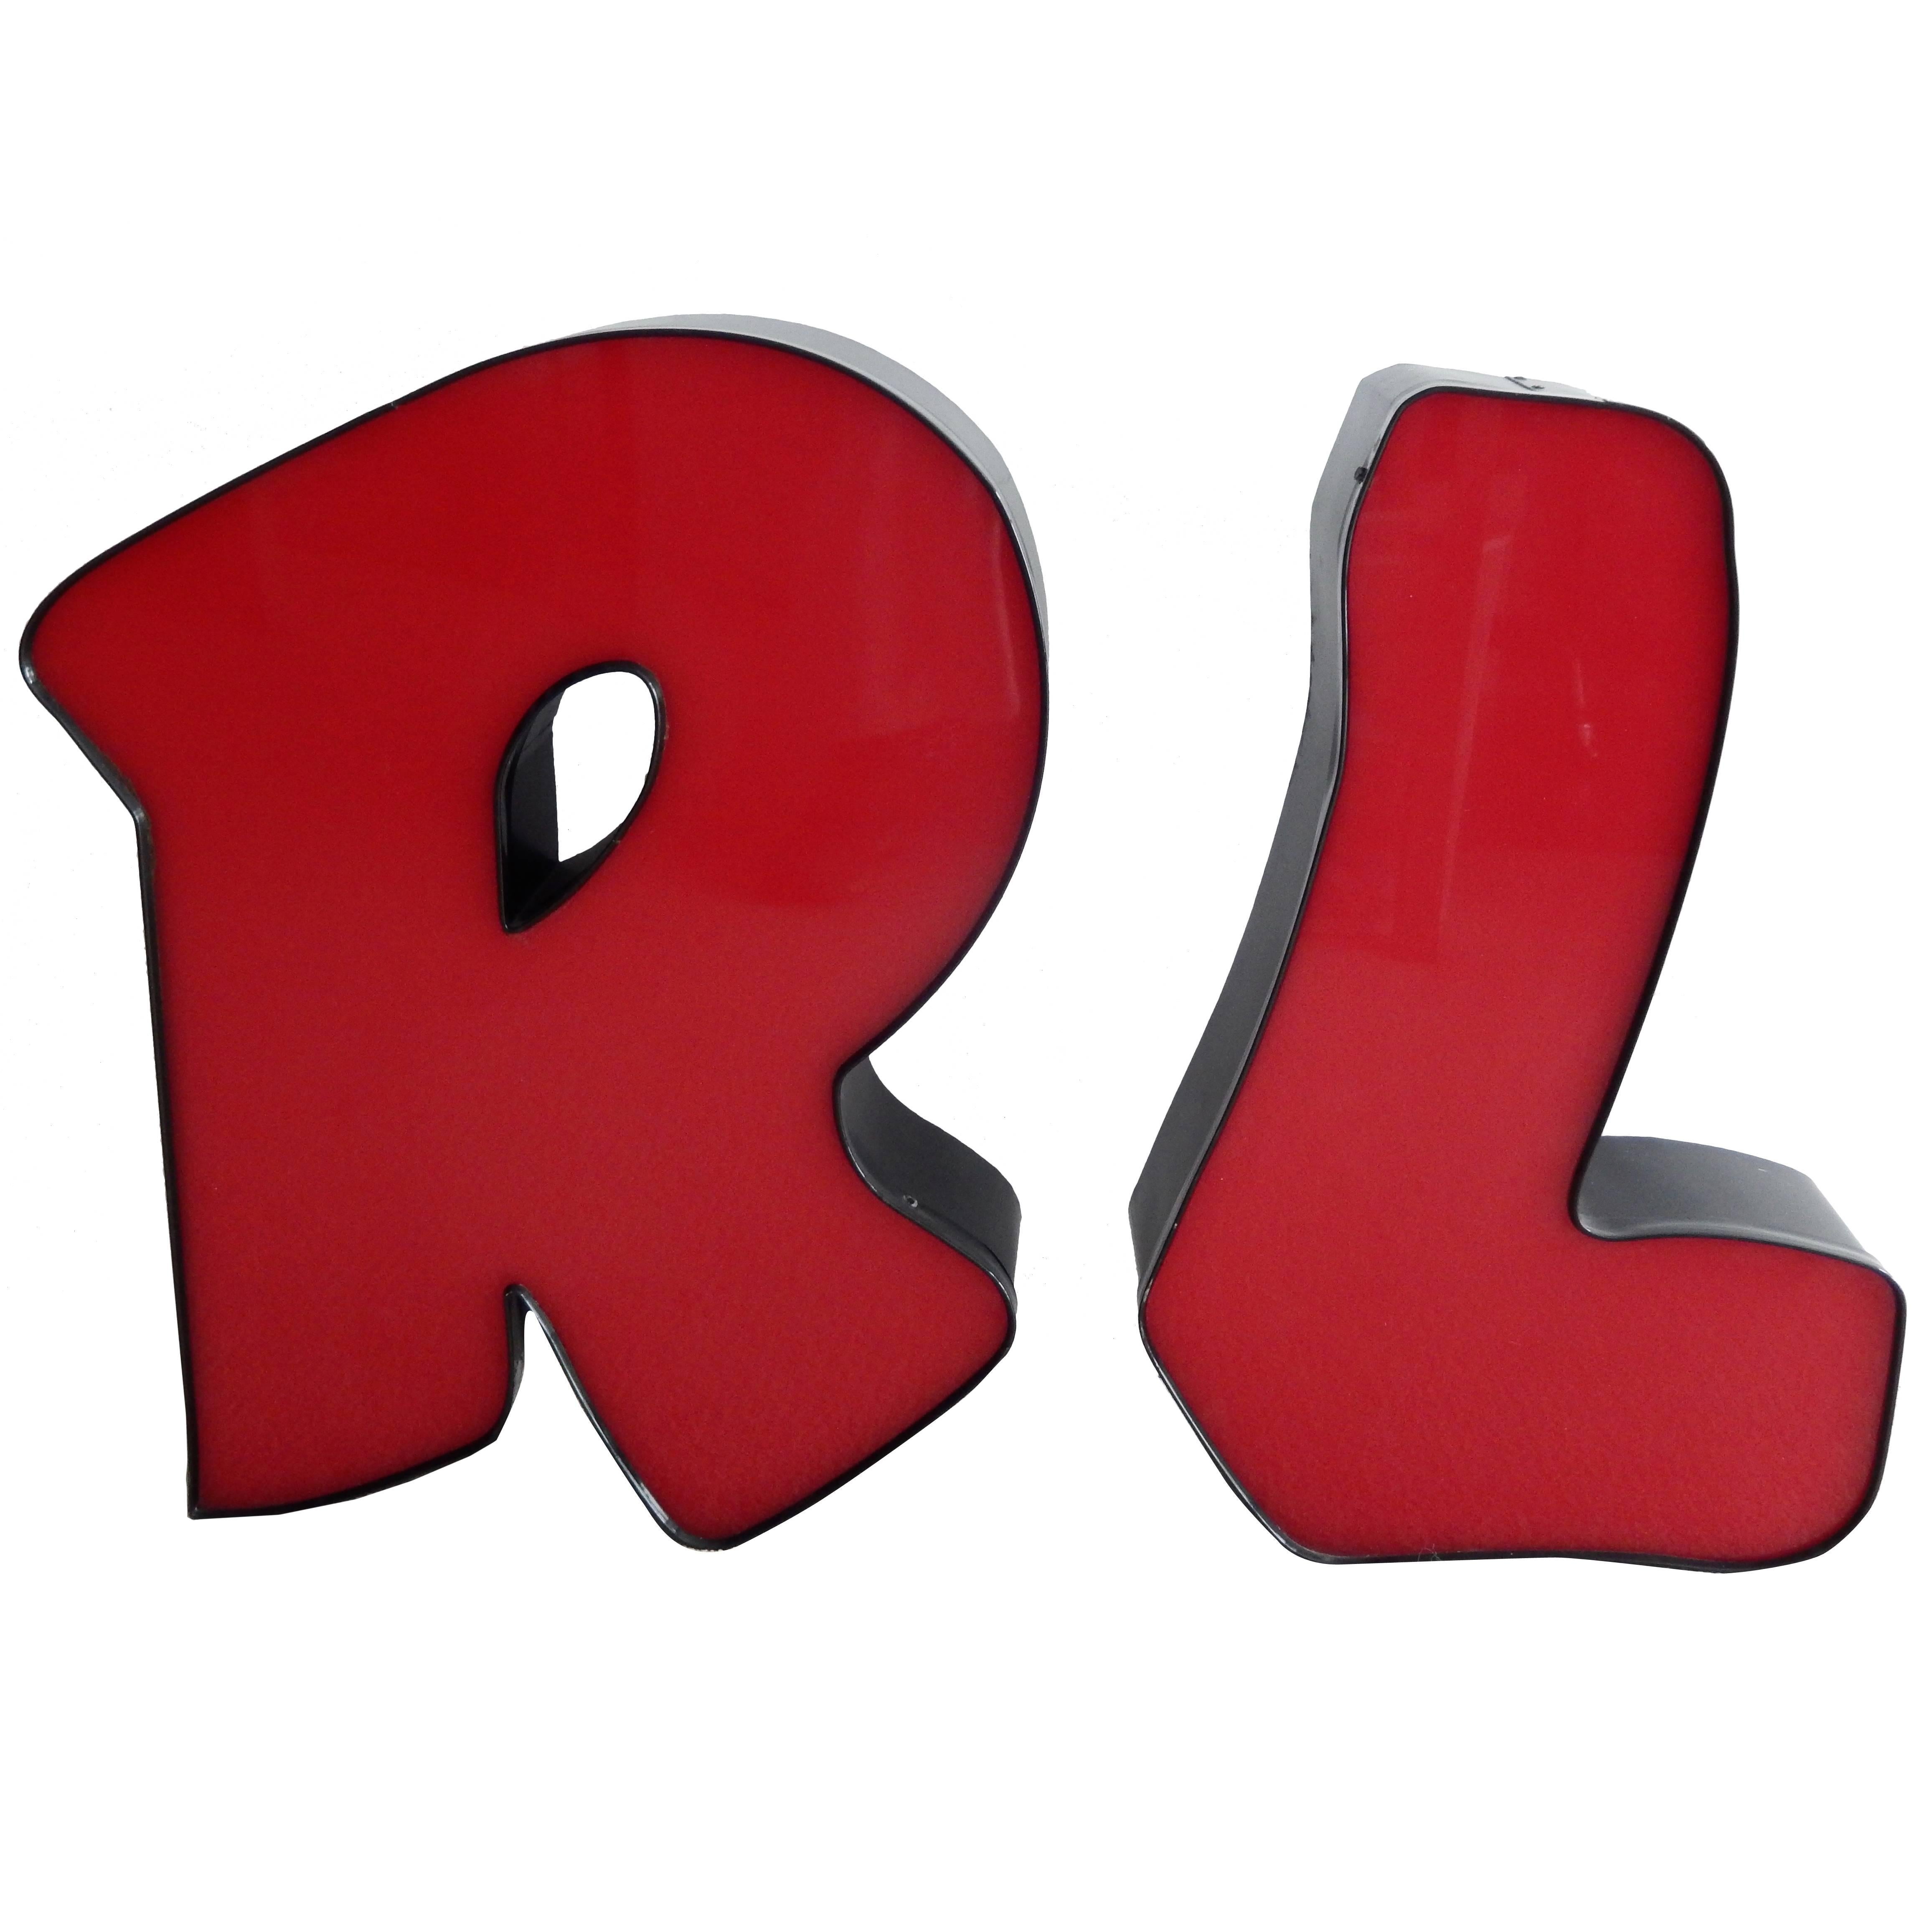 R and L "Pop Art" Commercial Sign Letters